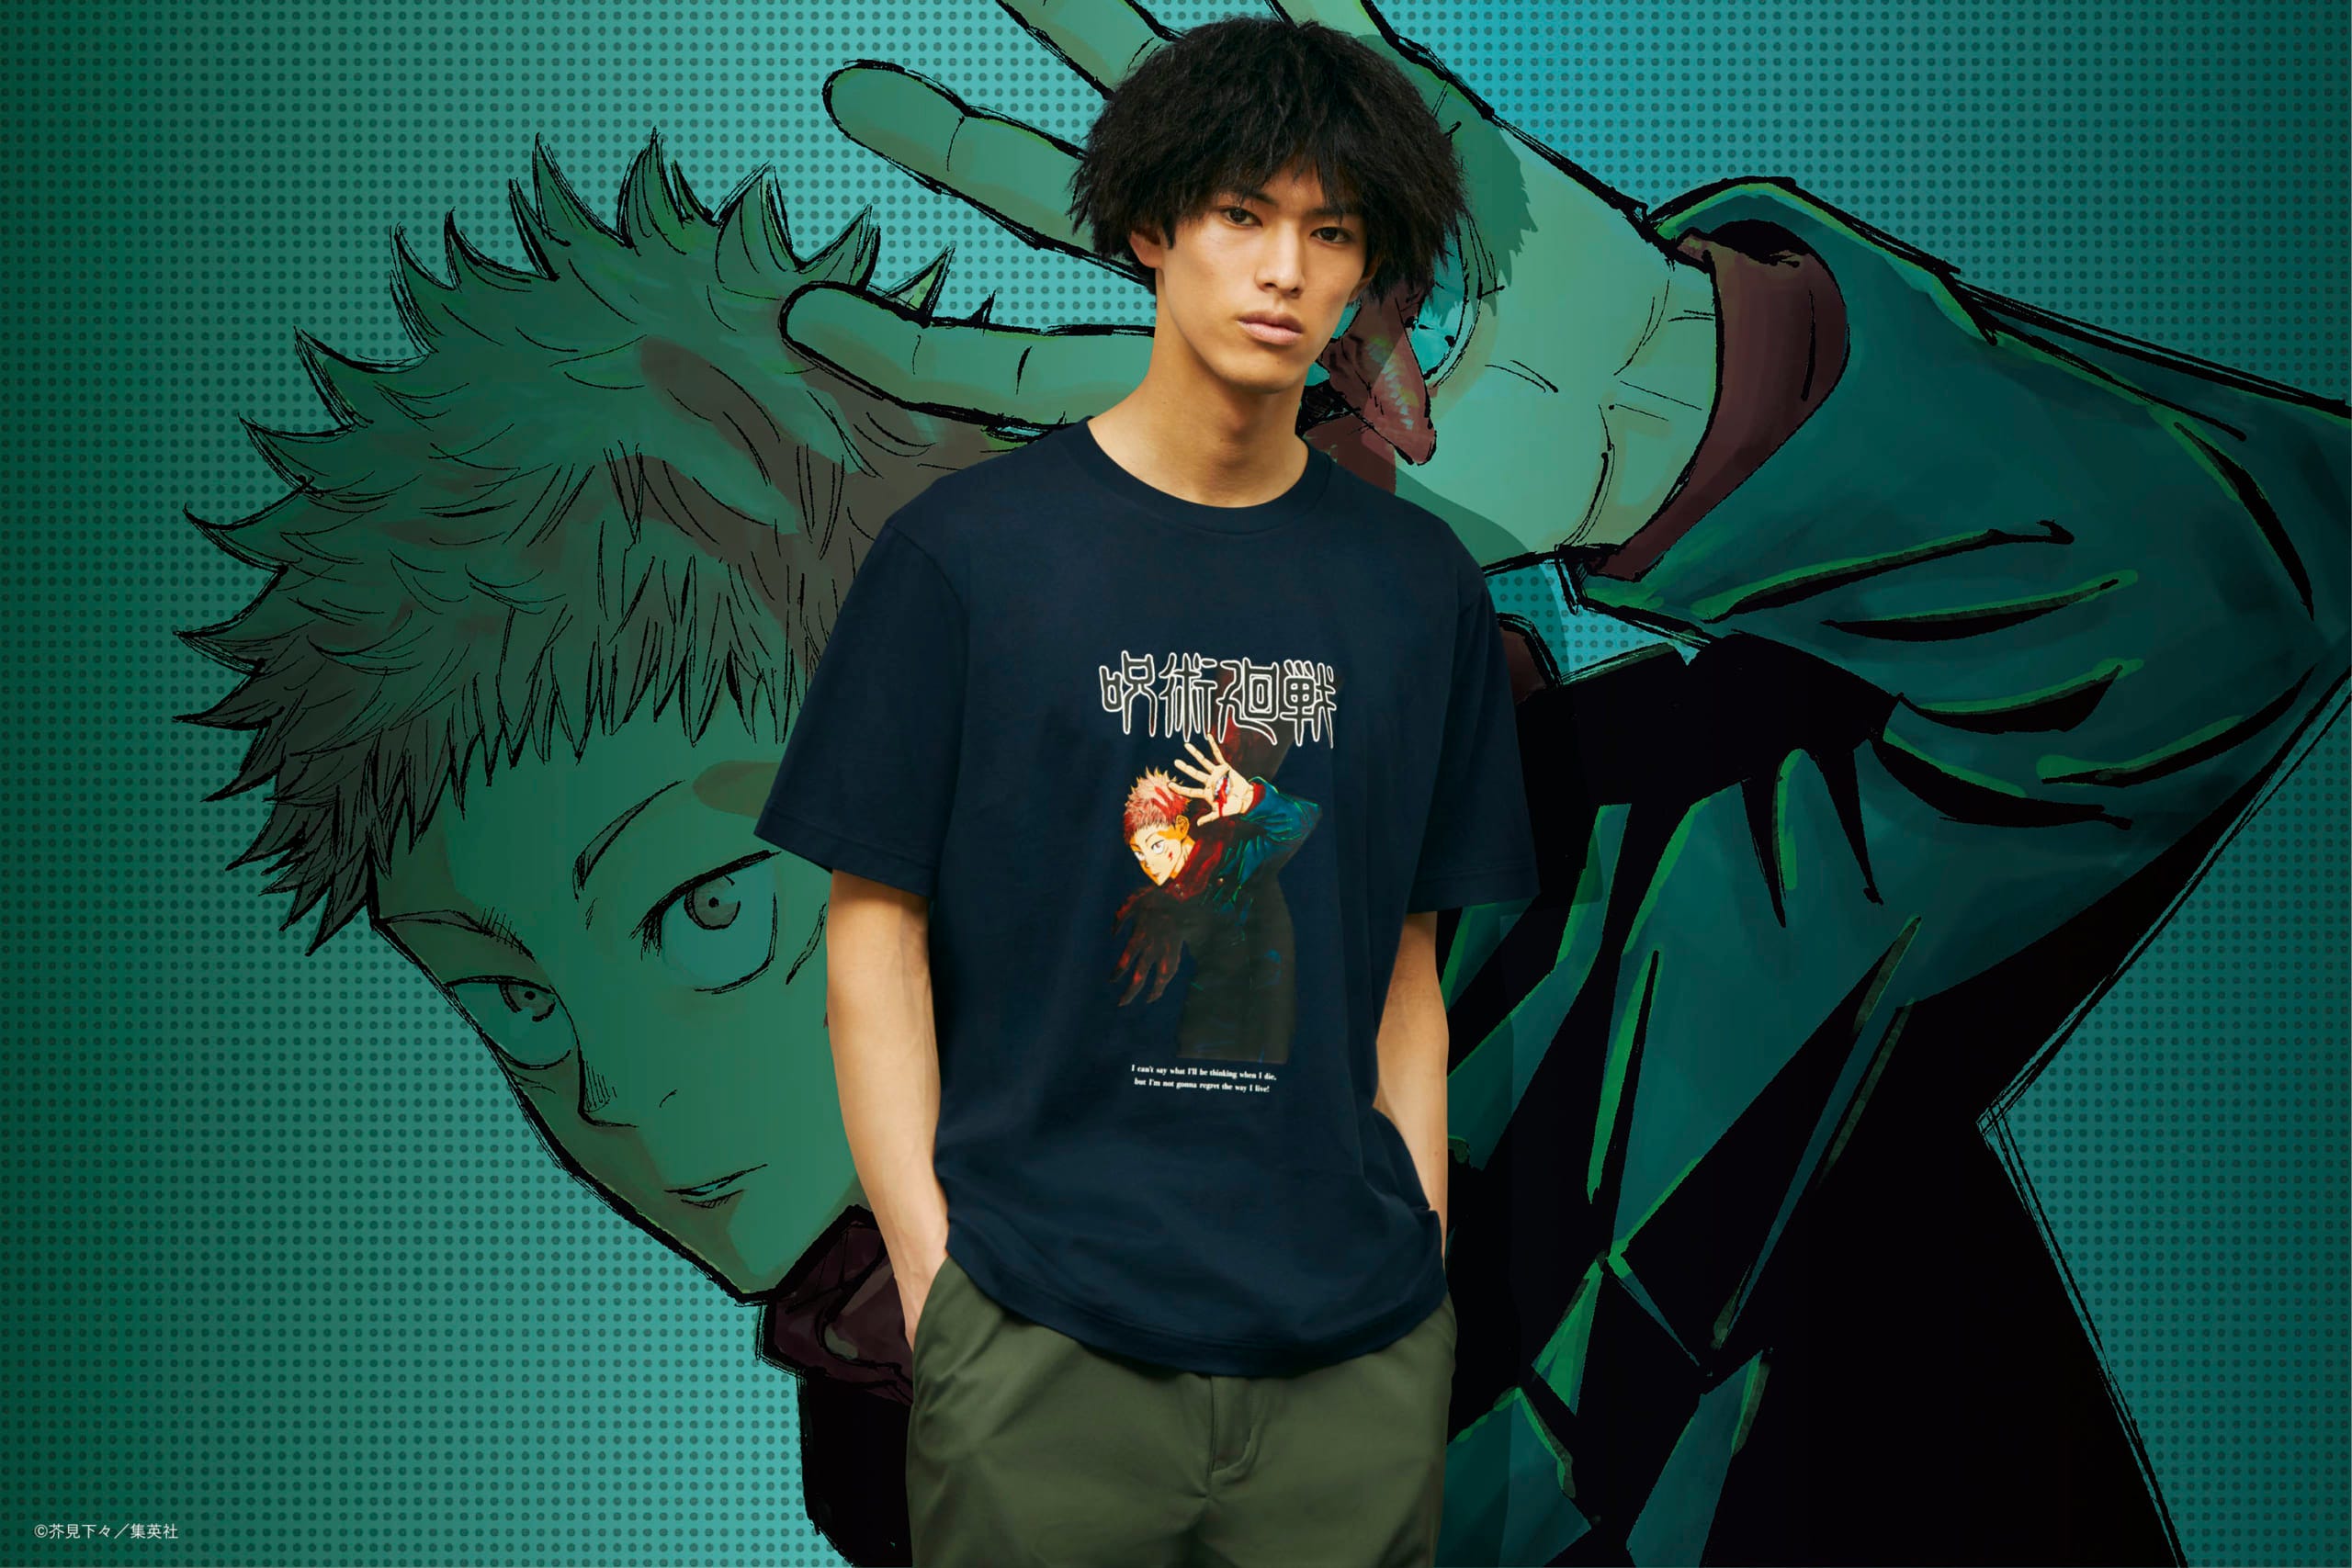 Mint/Sea Green Oversized T-shirt For Men With Anime Design